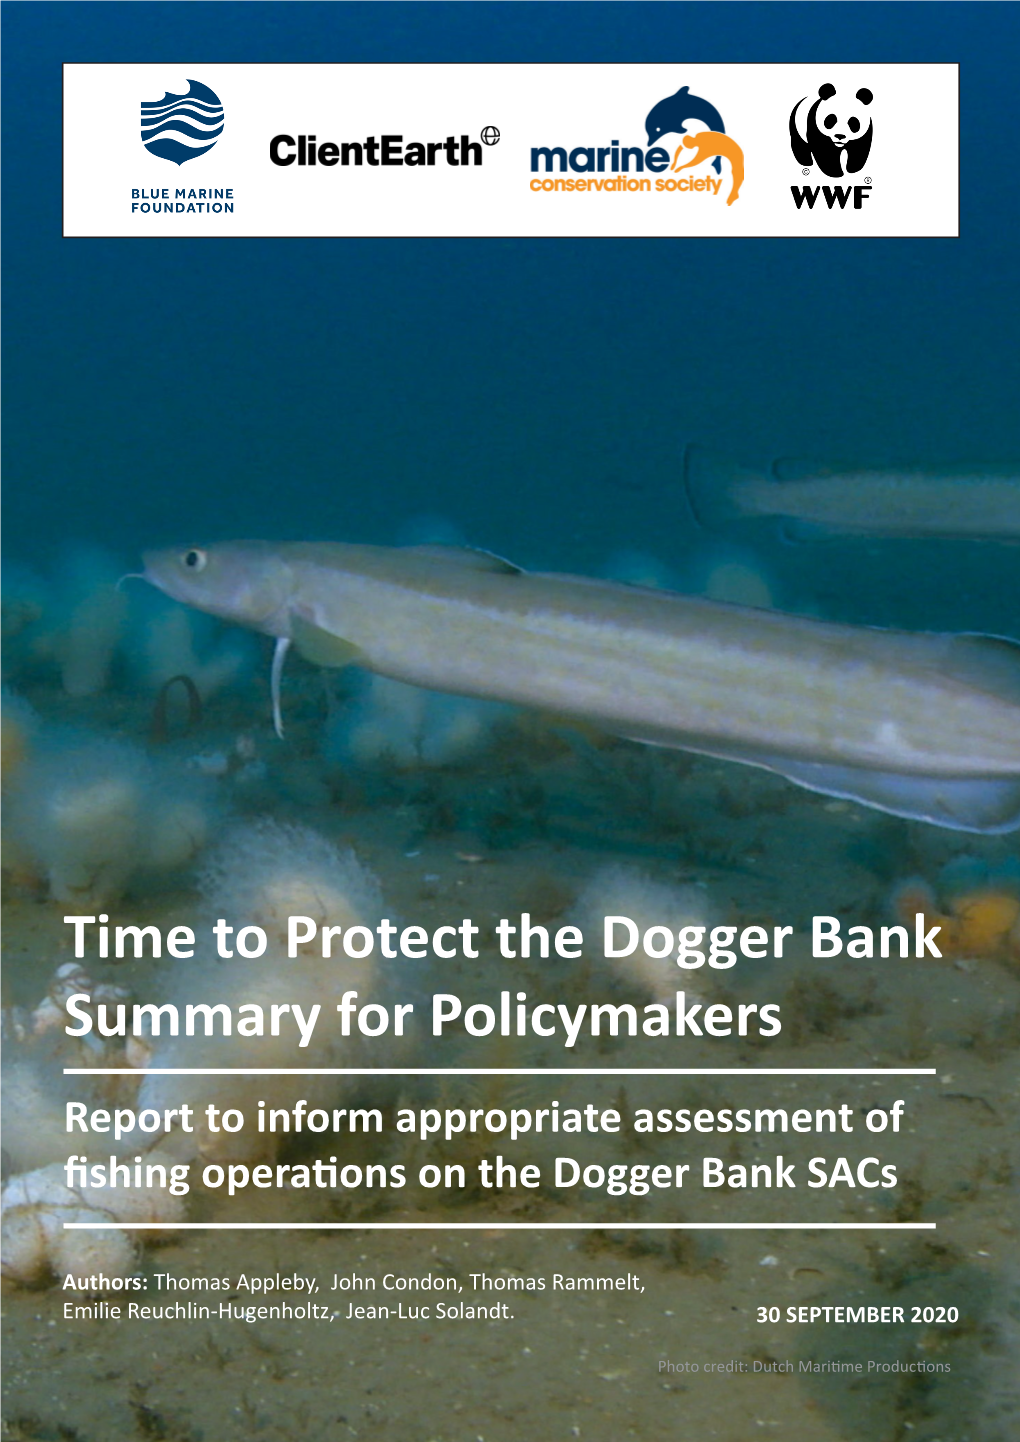 Time to Protect the Dogger Bank Summary for Policymakers Report to Inform Appropriate Assessment of Fishing Operations on the Dogger Bank Sacs